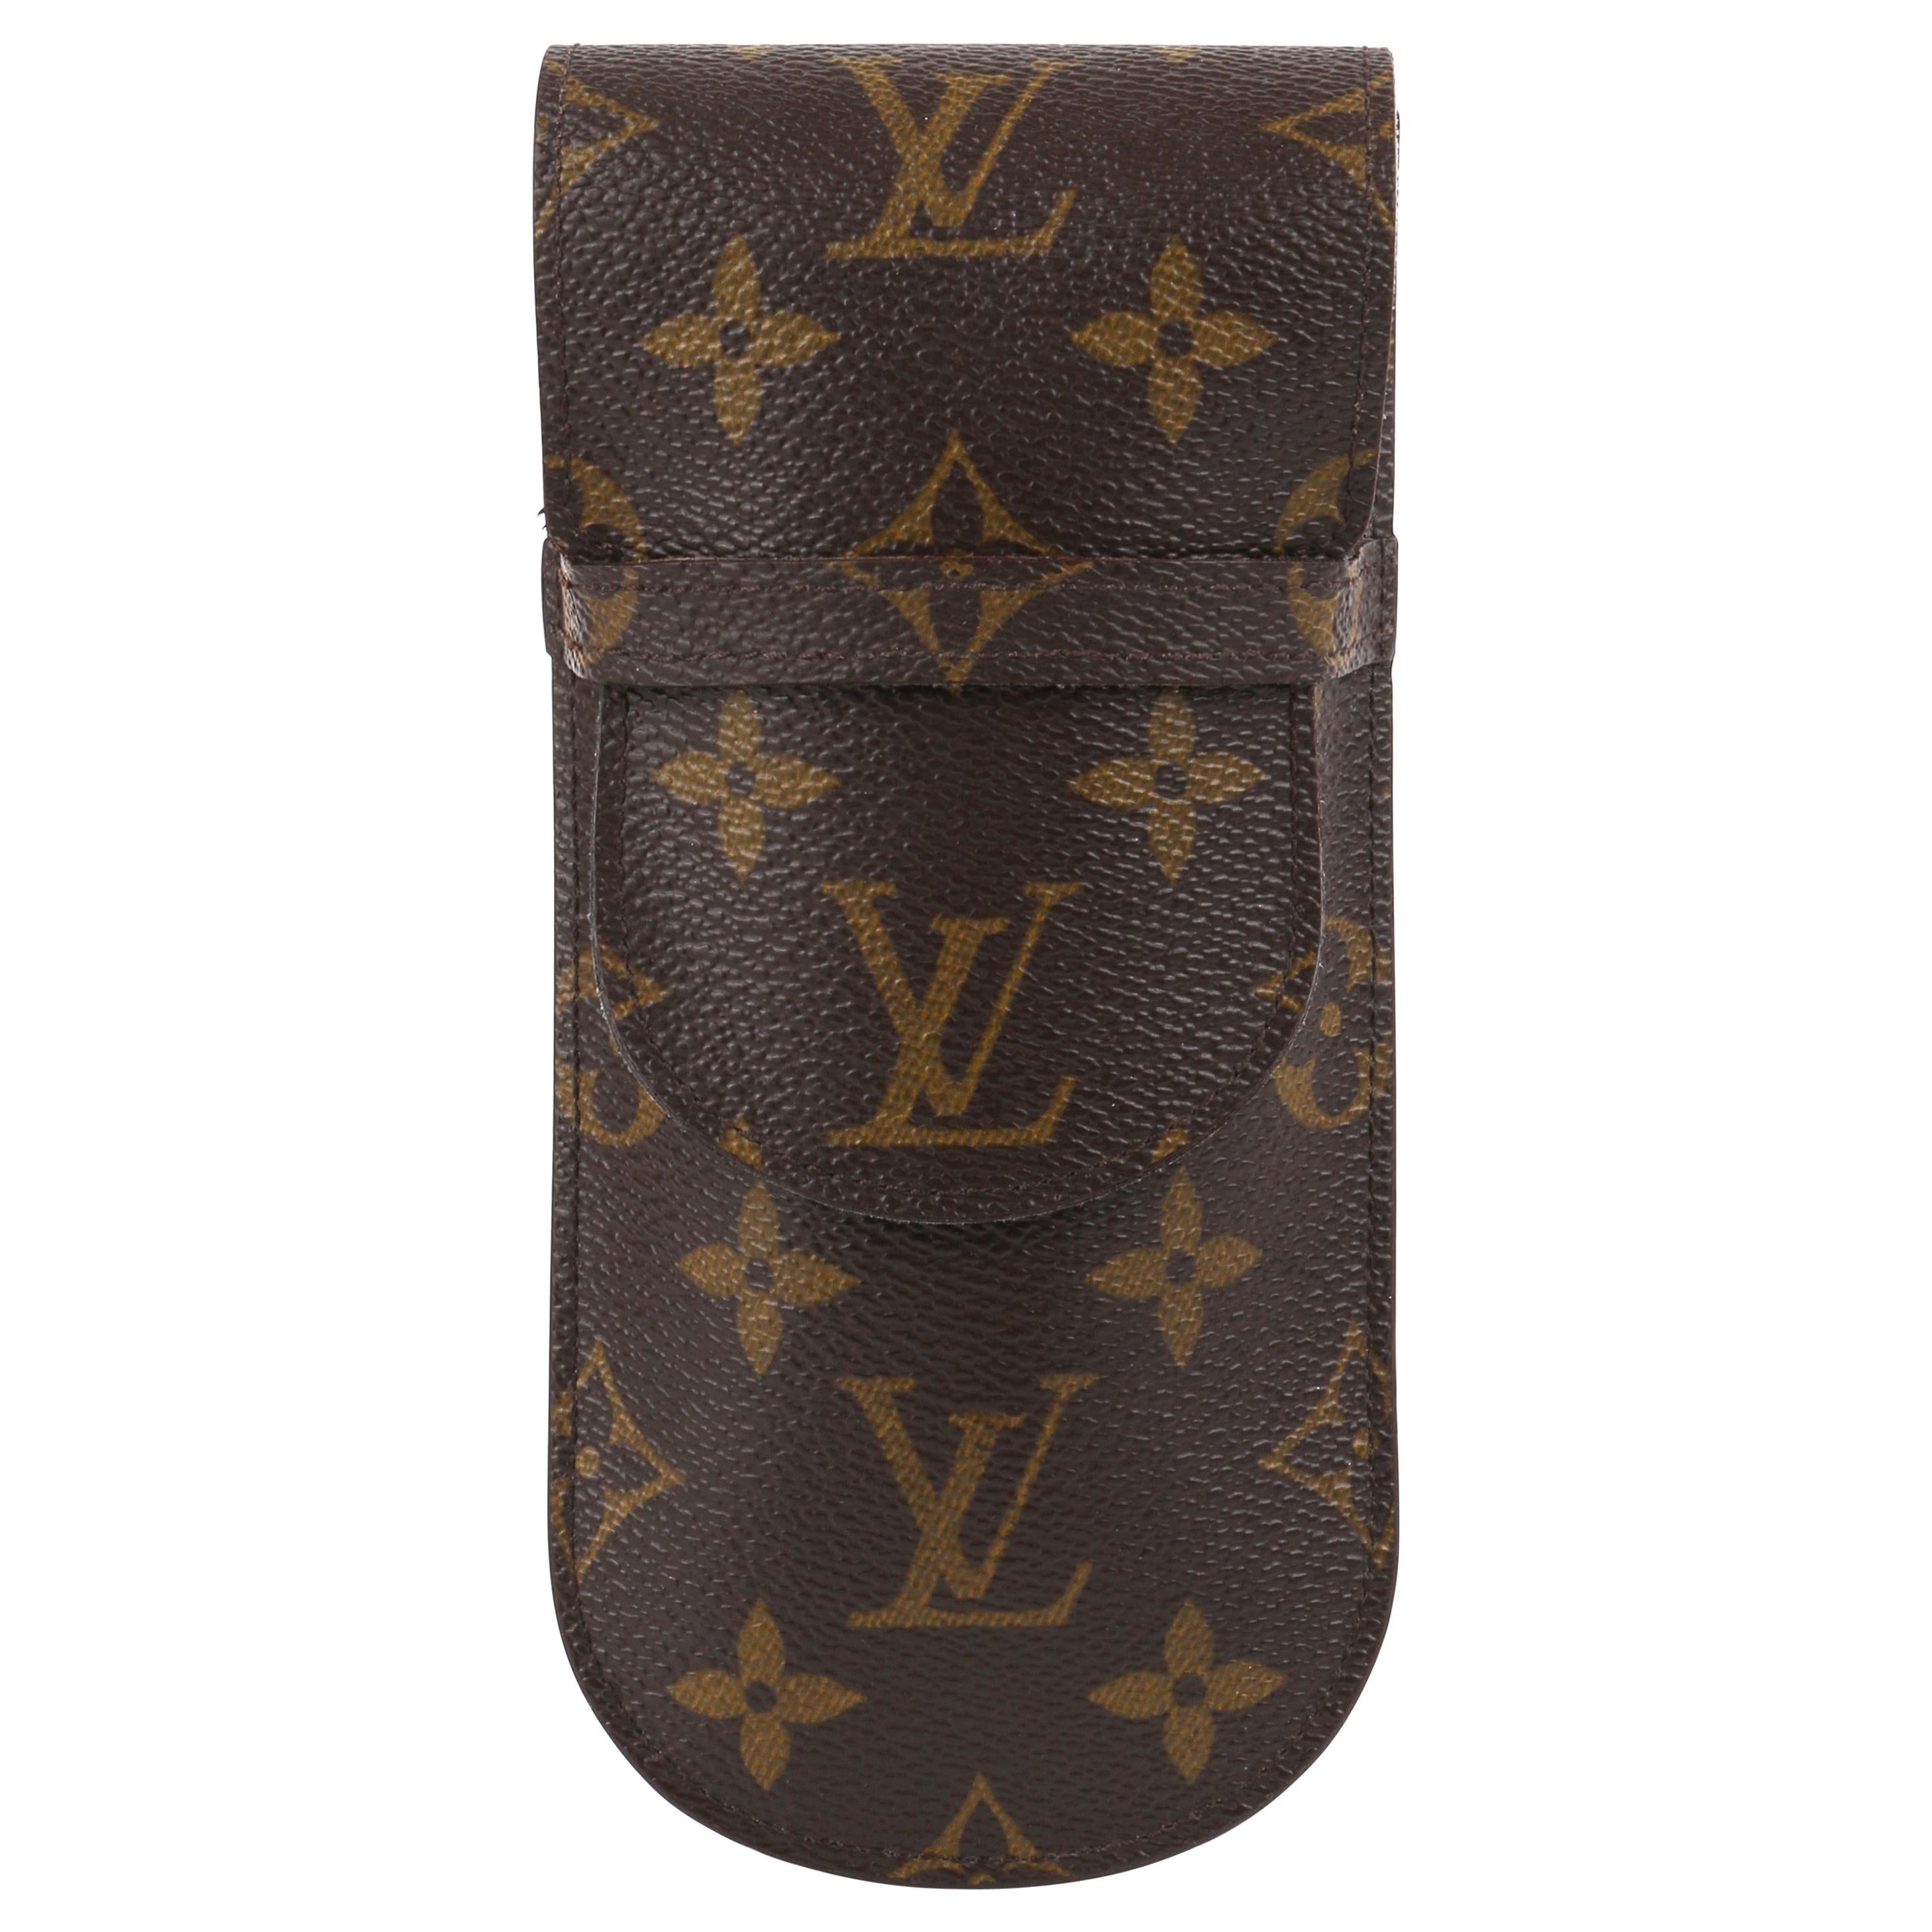 LOUIS VUITTON RUNWAY LIMITED EDITION GLASSES CASE